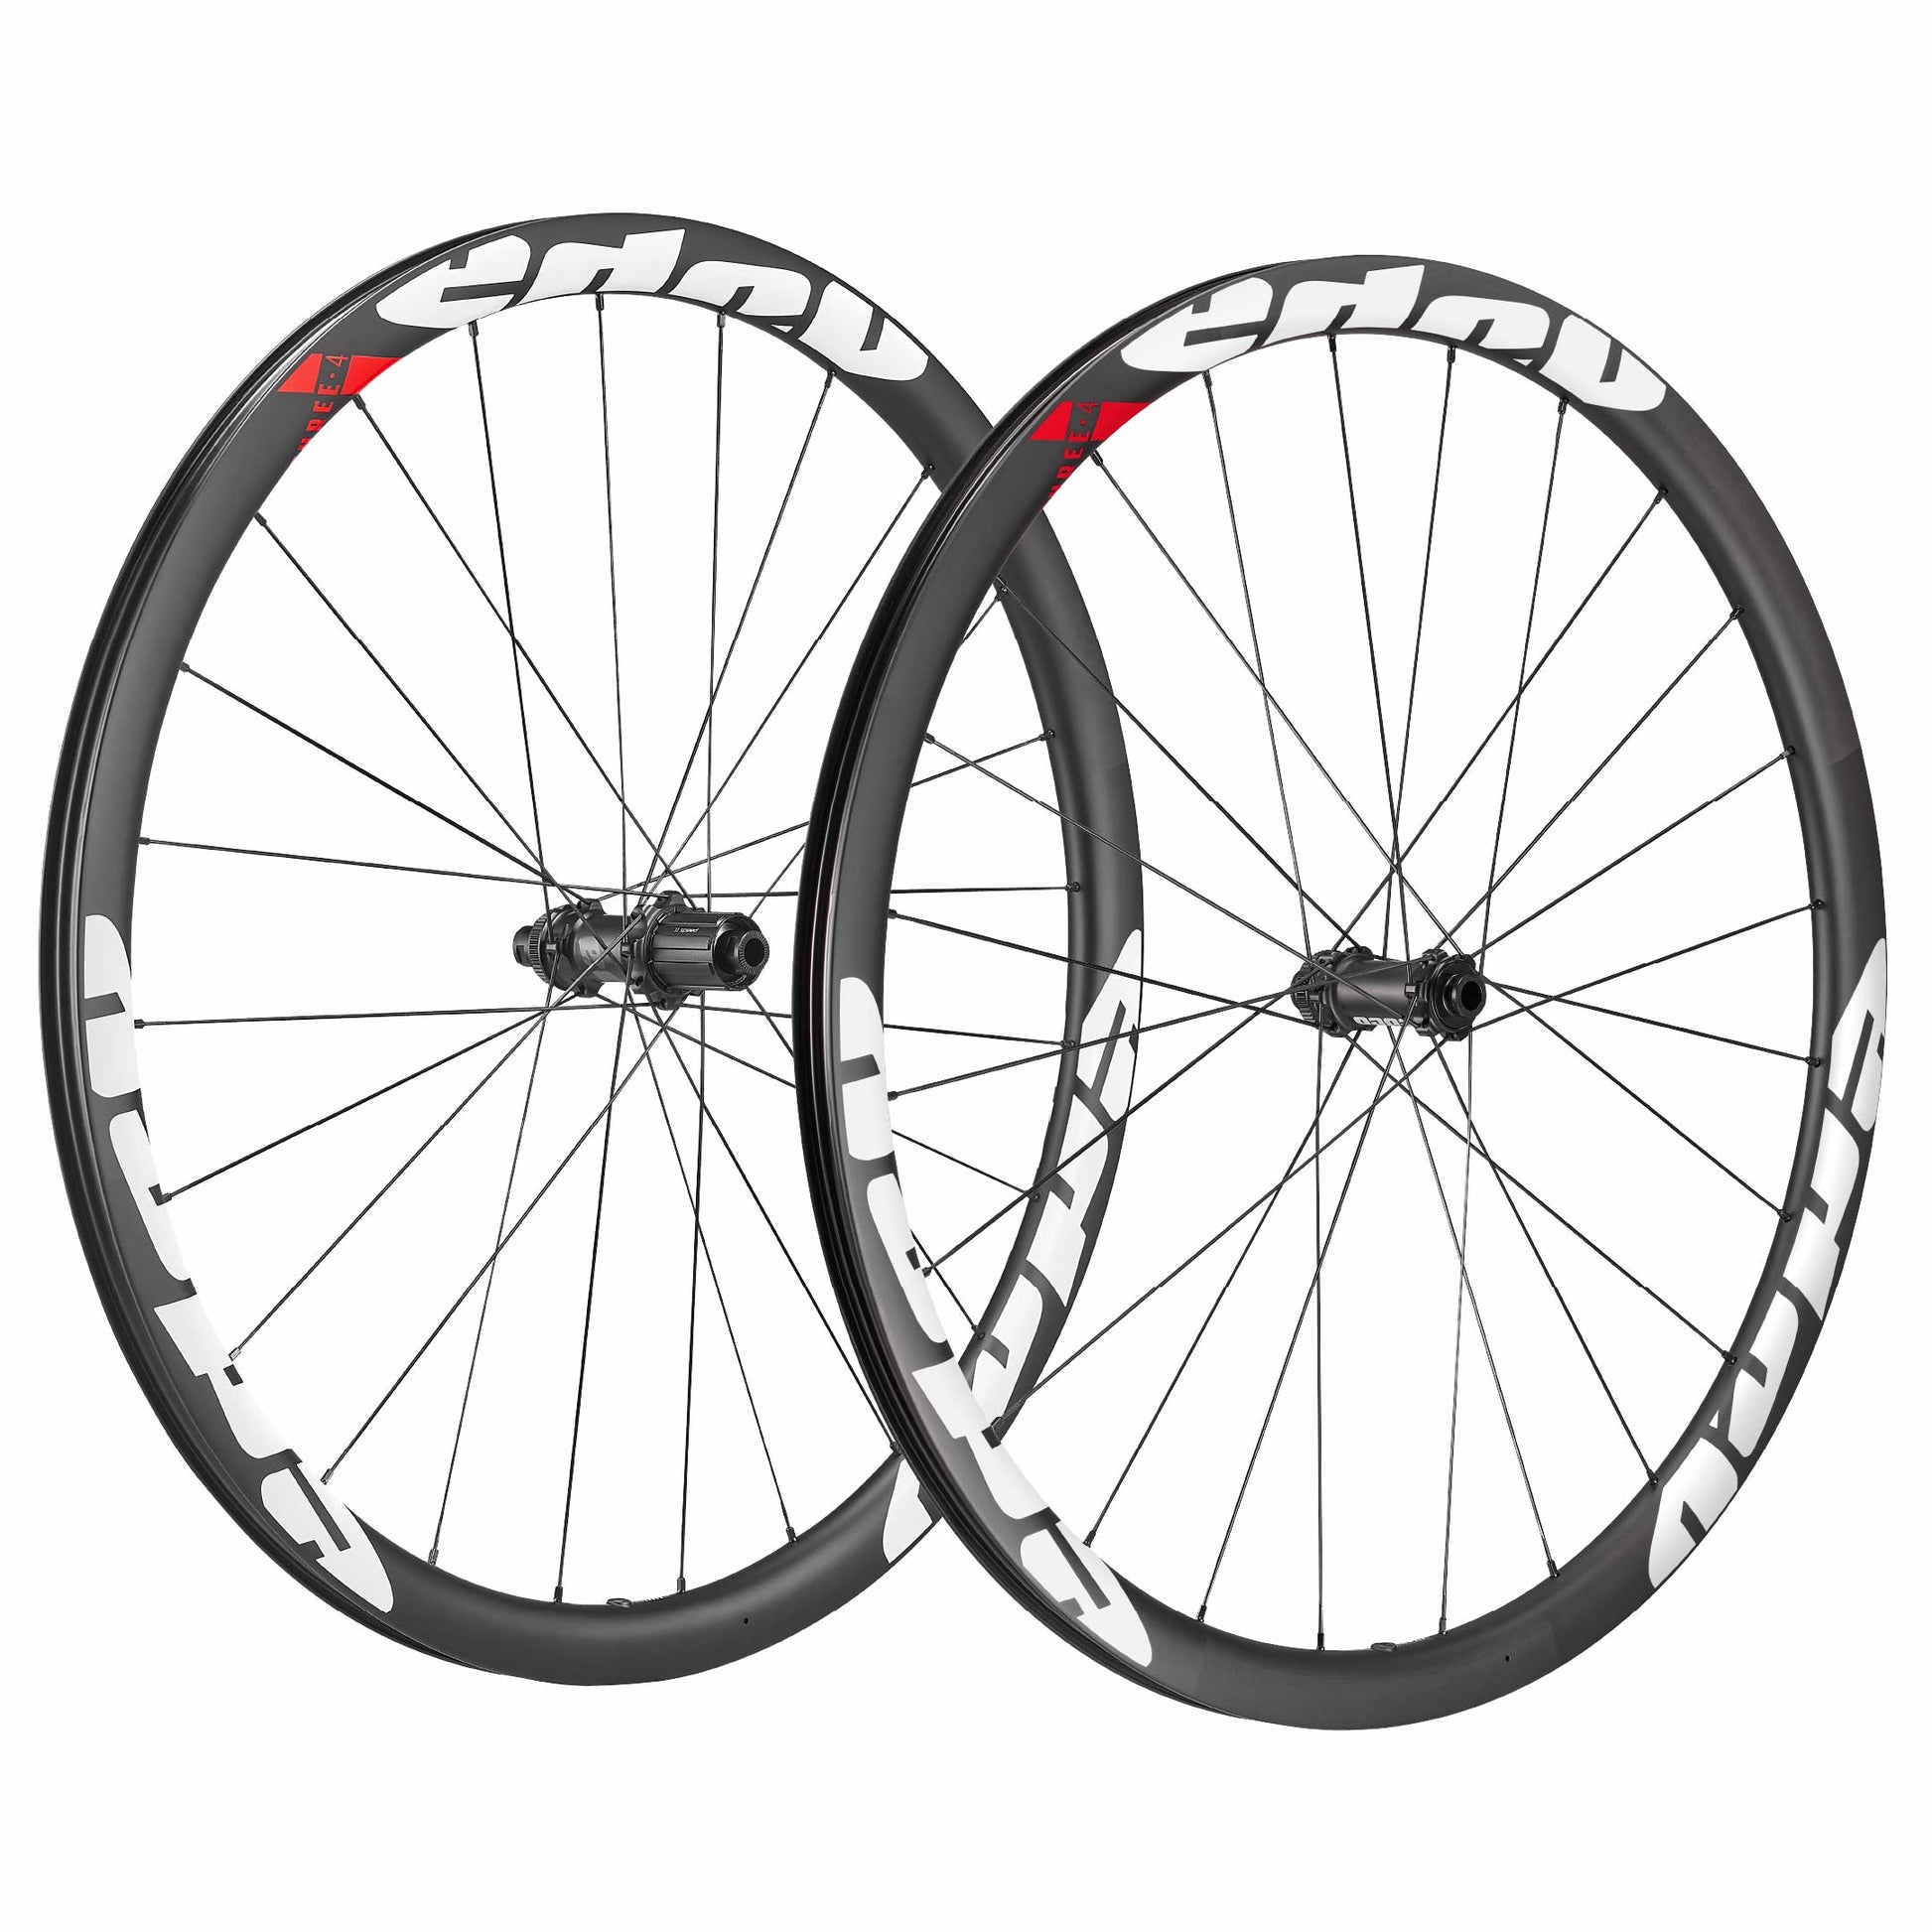 34mm deep carbon fibre wheelset with red white logos